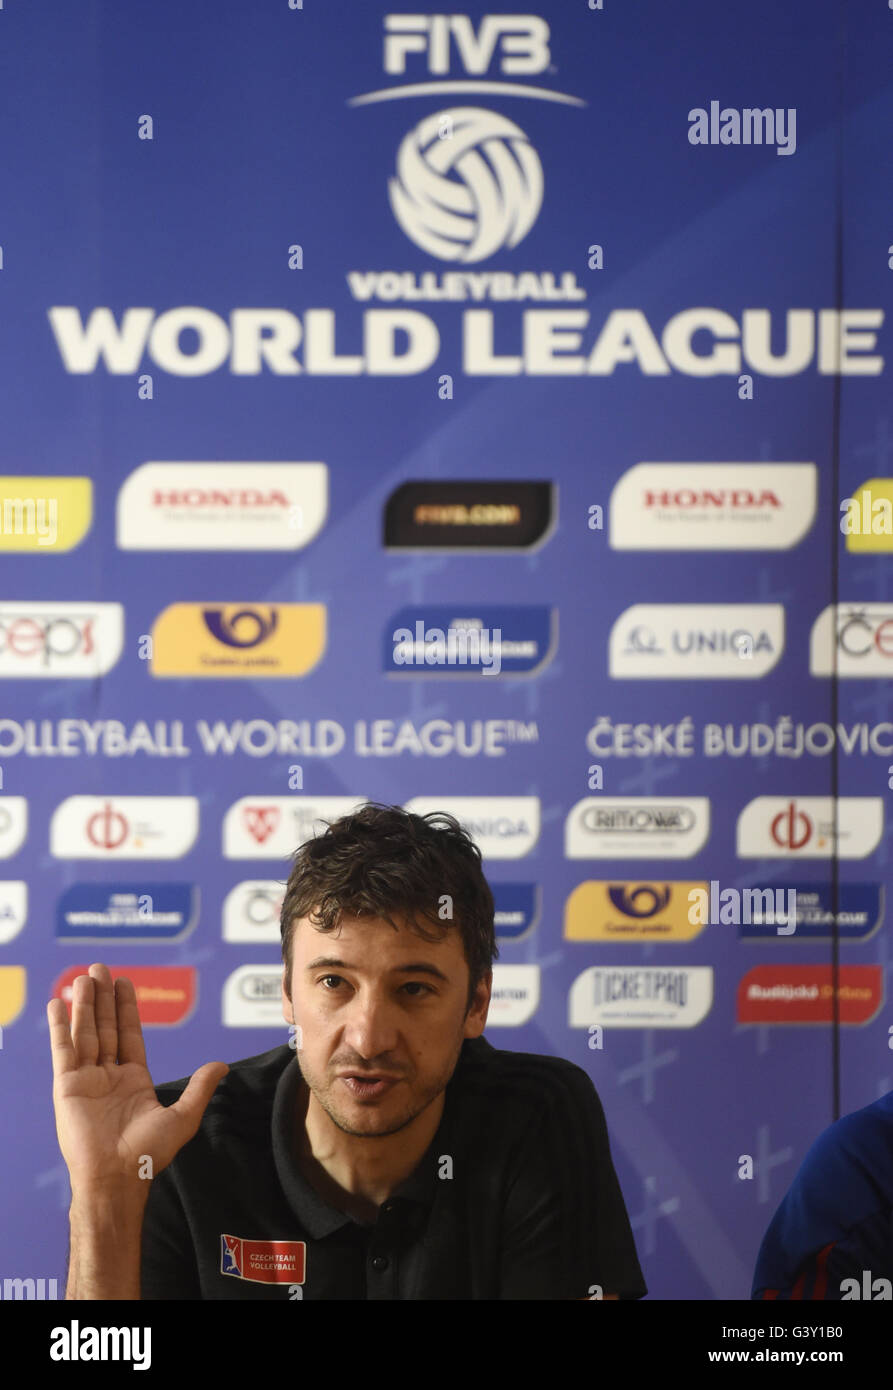 Ceske Budejovice, Czech Republic. 16th June, 2016. Miguel Falasca, The Head Coach of Czech Republic Men's National Volleyball Team, speaks during a press conference concerning team's first match at FIVB Volleyball World League in Ceske Budejovice, Czech Republic, on Thursday, June 16th, 2016. Stock Photo